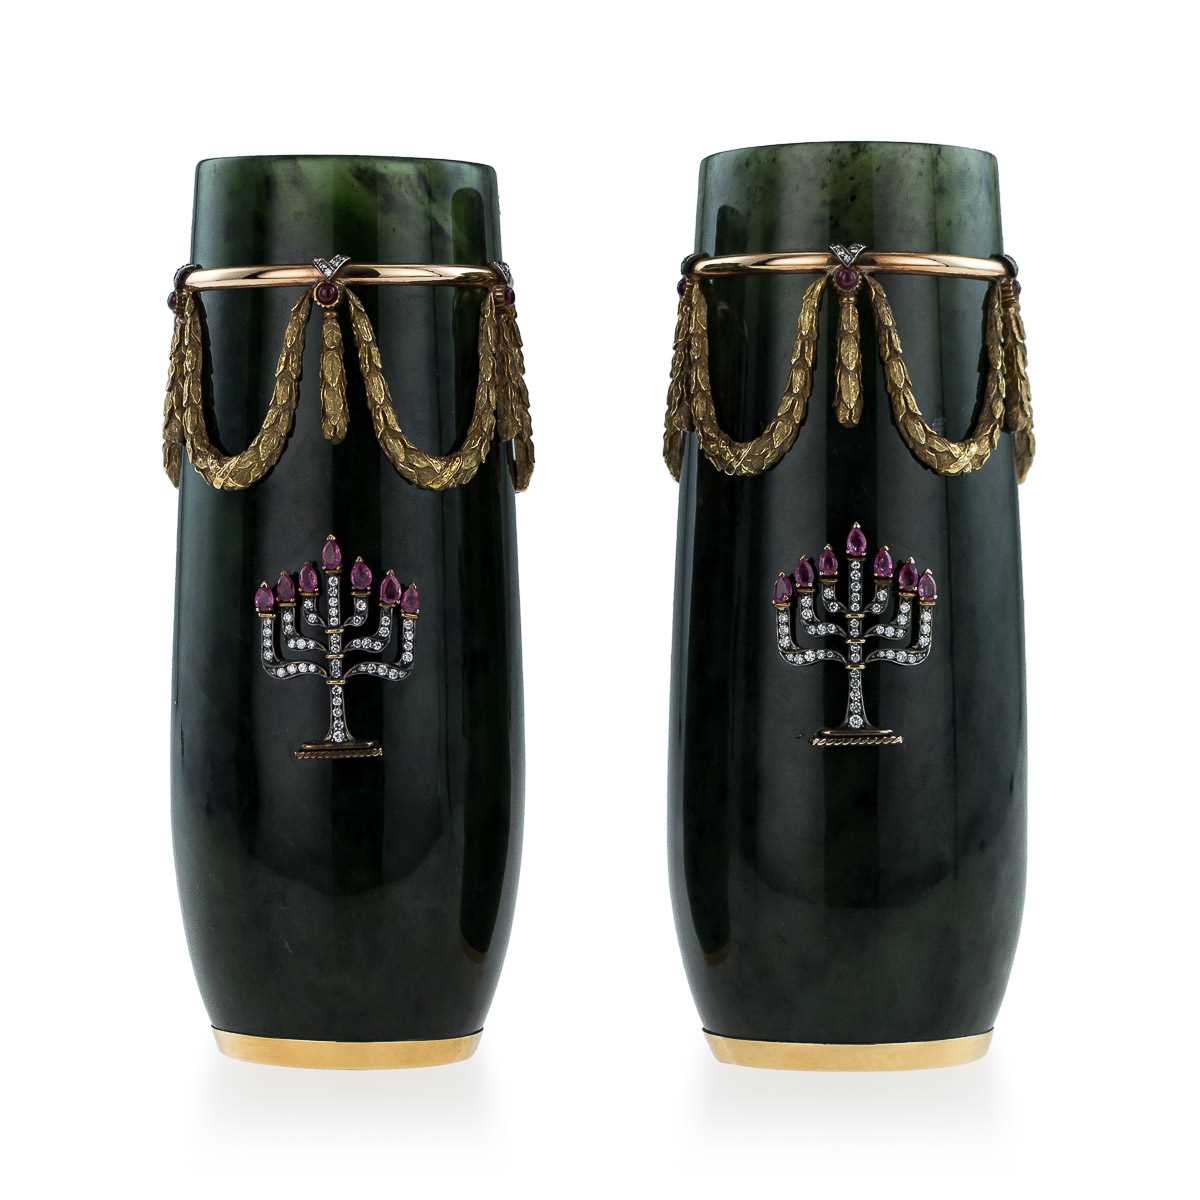 A PAIR 14K GOLD, NEPHRITE, DIAMOND AND RUBY ENCRUSTED VASES IN THE STYLE OF FABERGE